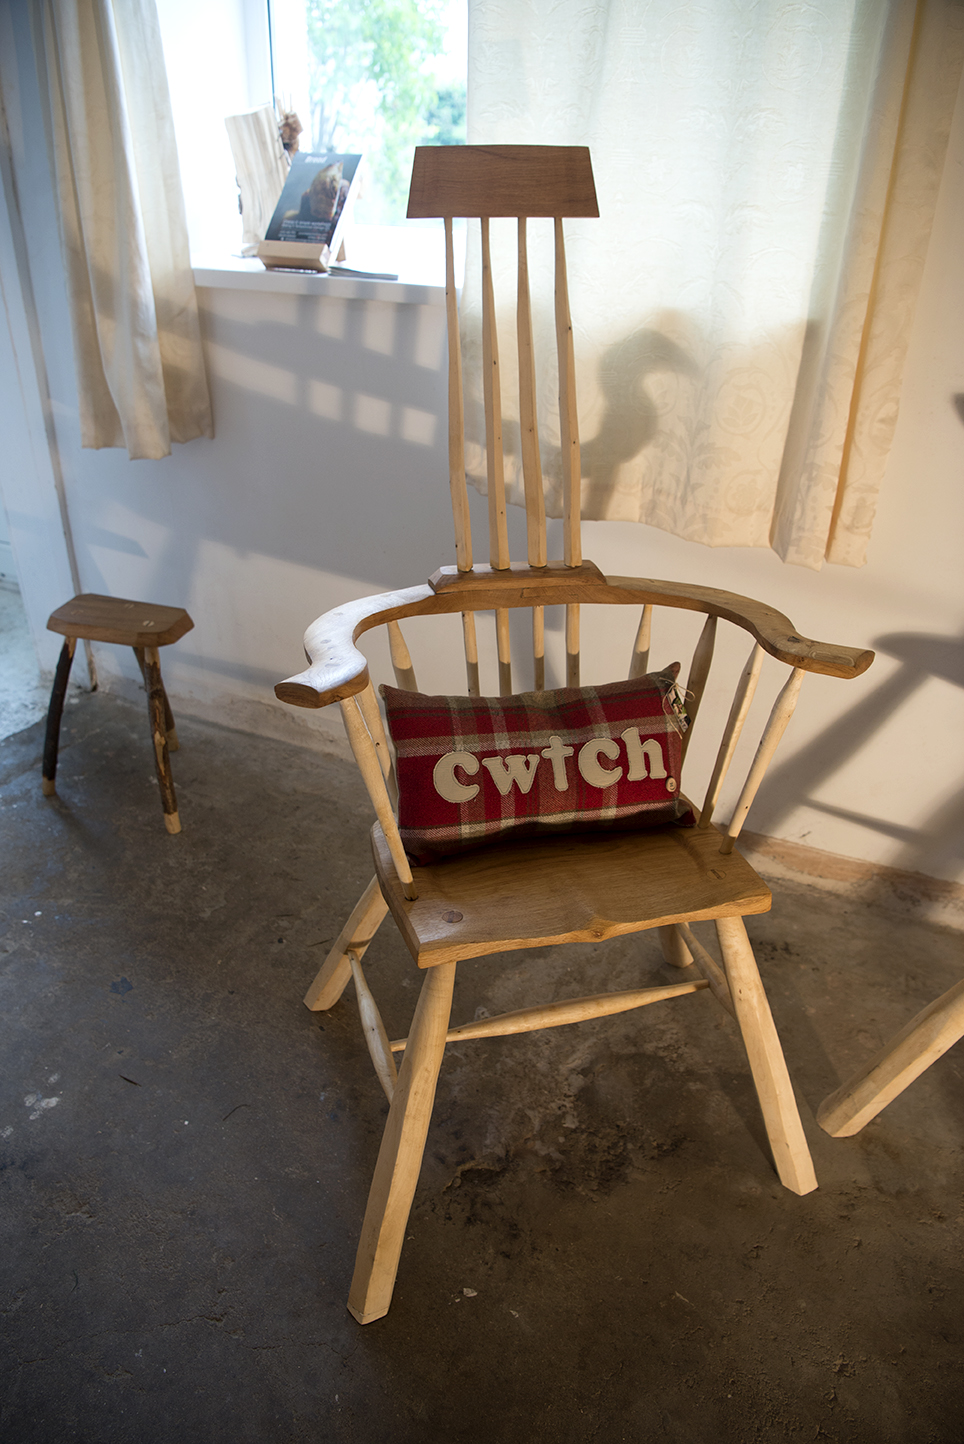 Cwtch chair can be viewed and purchased at the Golden Sheaf Gallery in Narberth, South Wales 